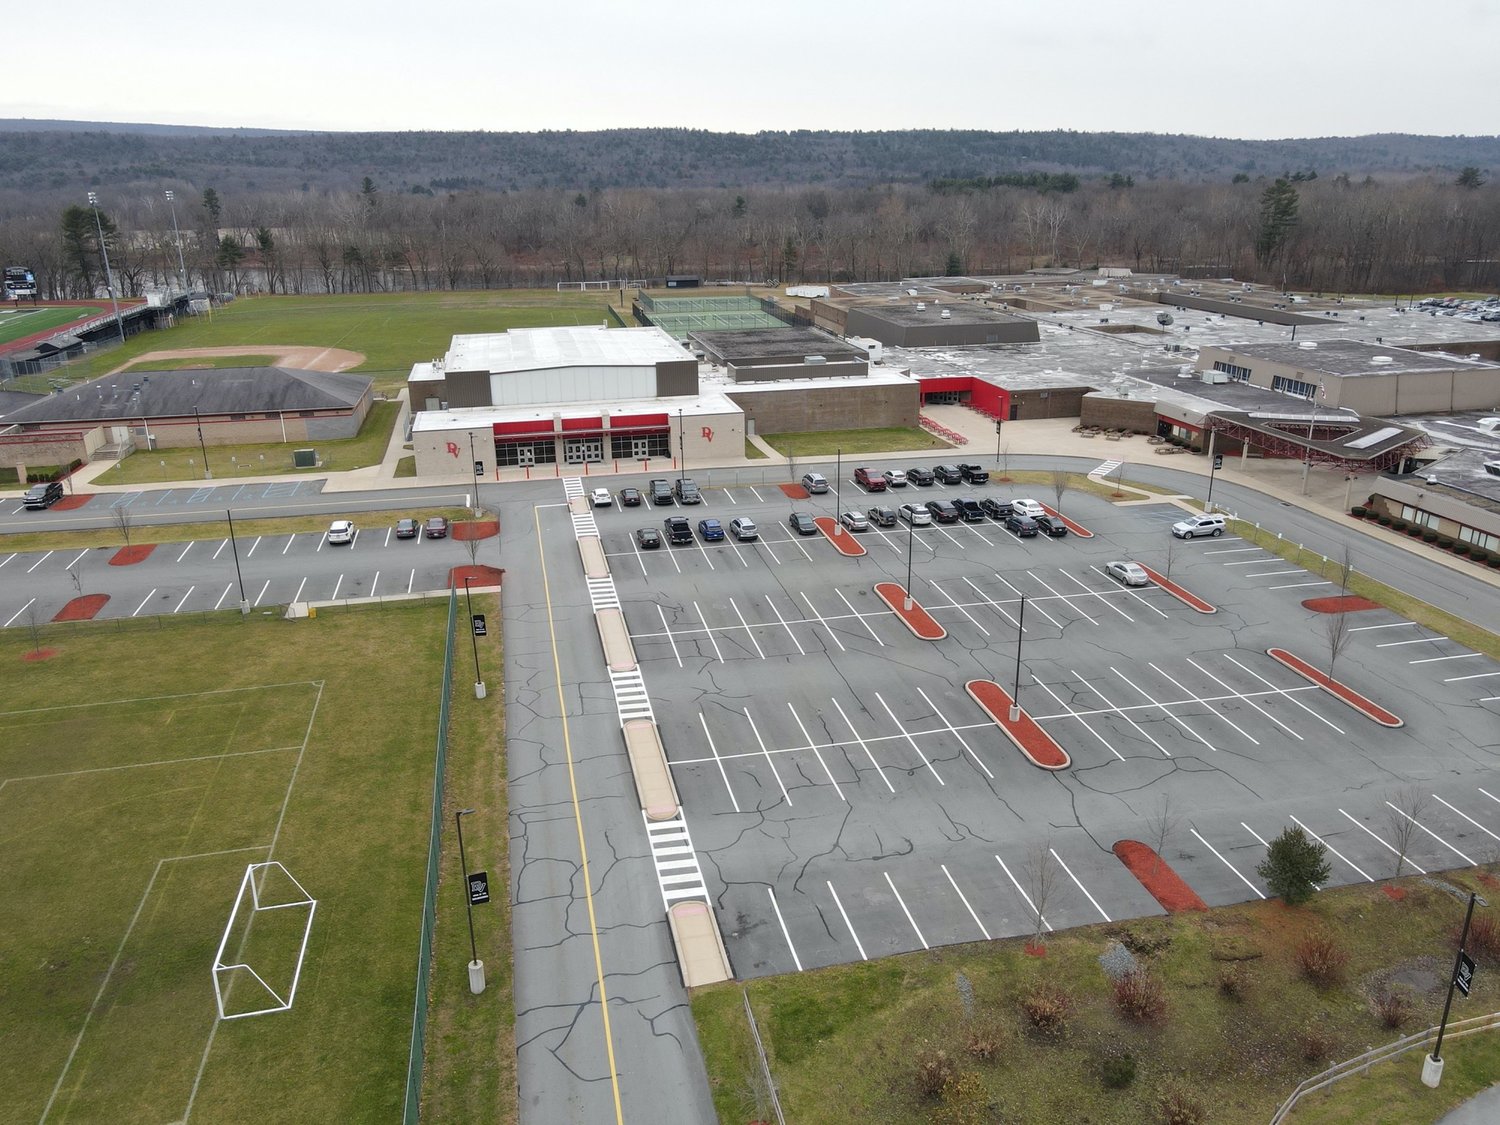 Delaware Valley School District serves approximately 4,400 students in seven schools. There are four elementary schools, two middle schools and one comprehensive high school located in Pike County, PA.